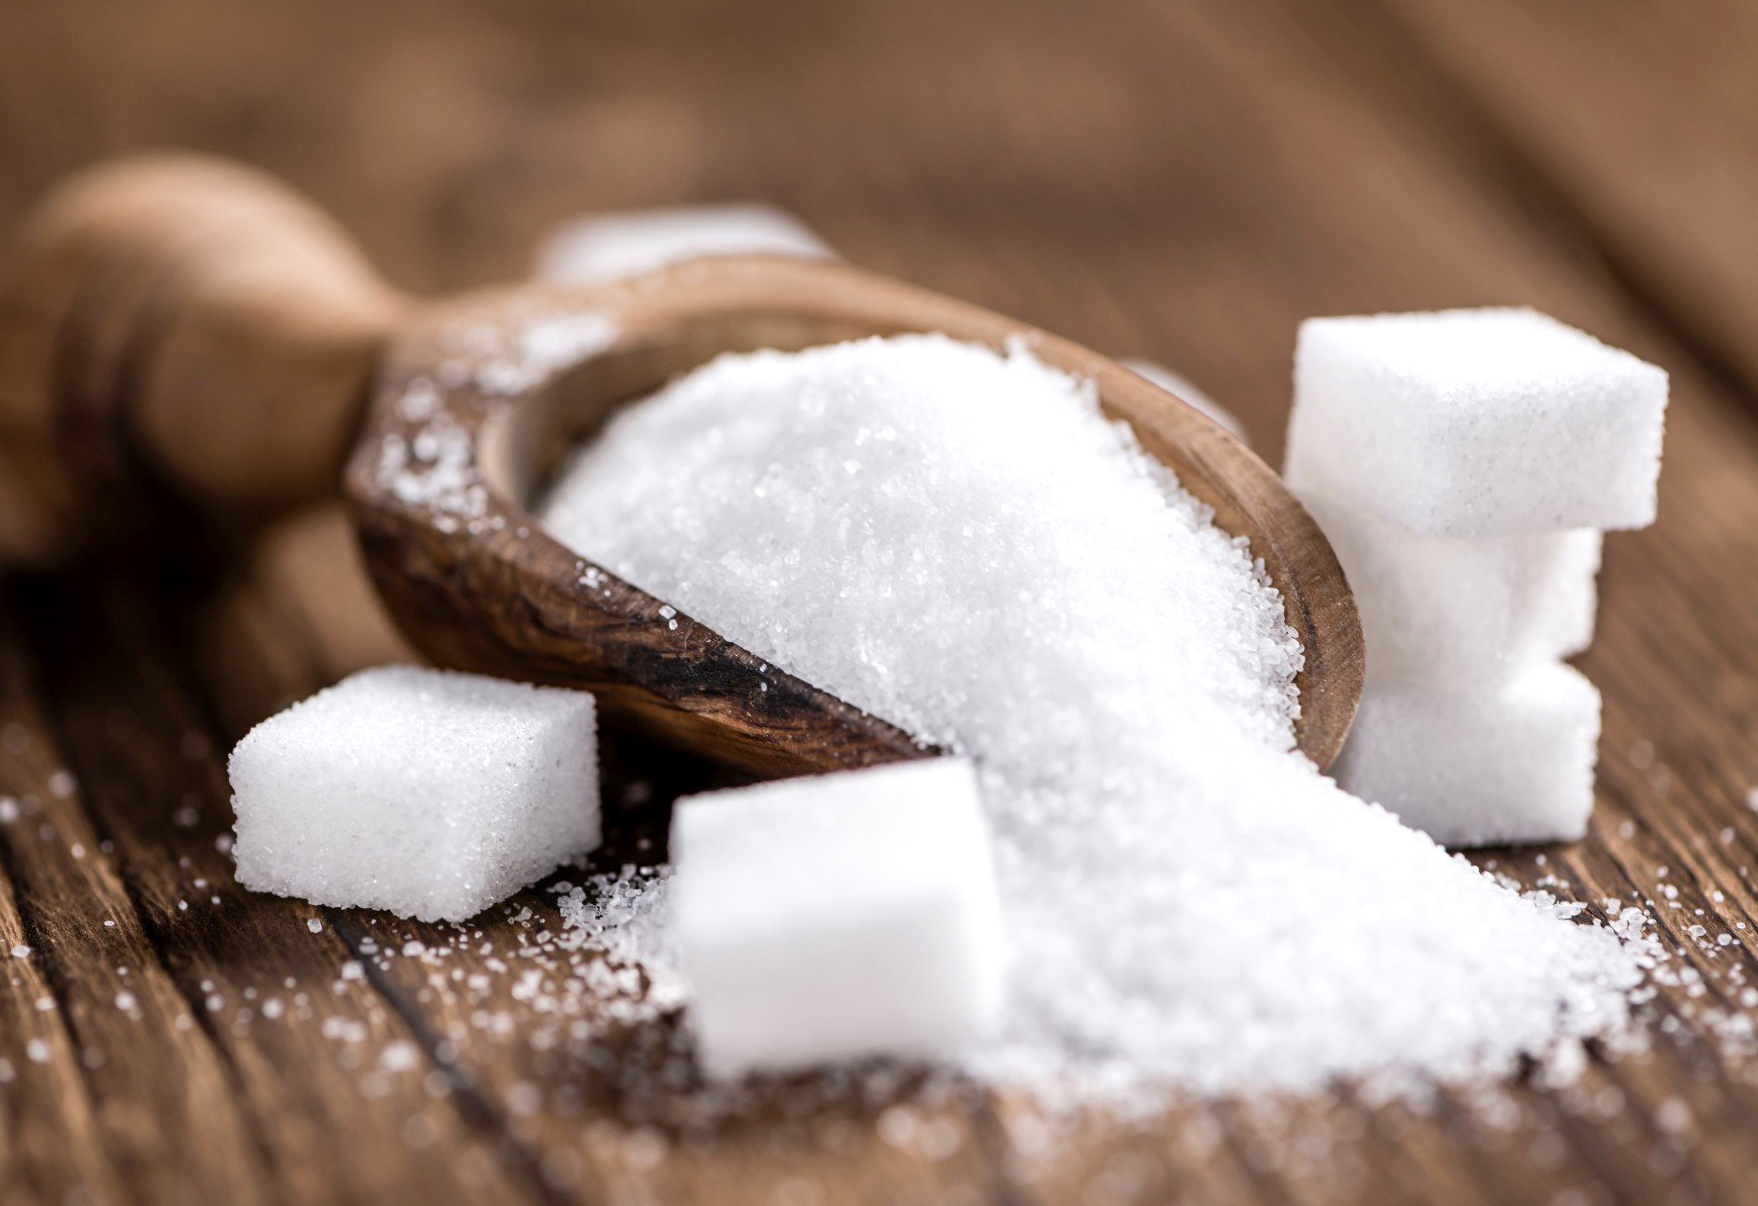 The sugar prices in the market are currently experiencing unusual fluctuations.